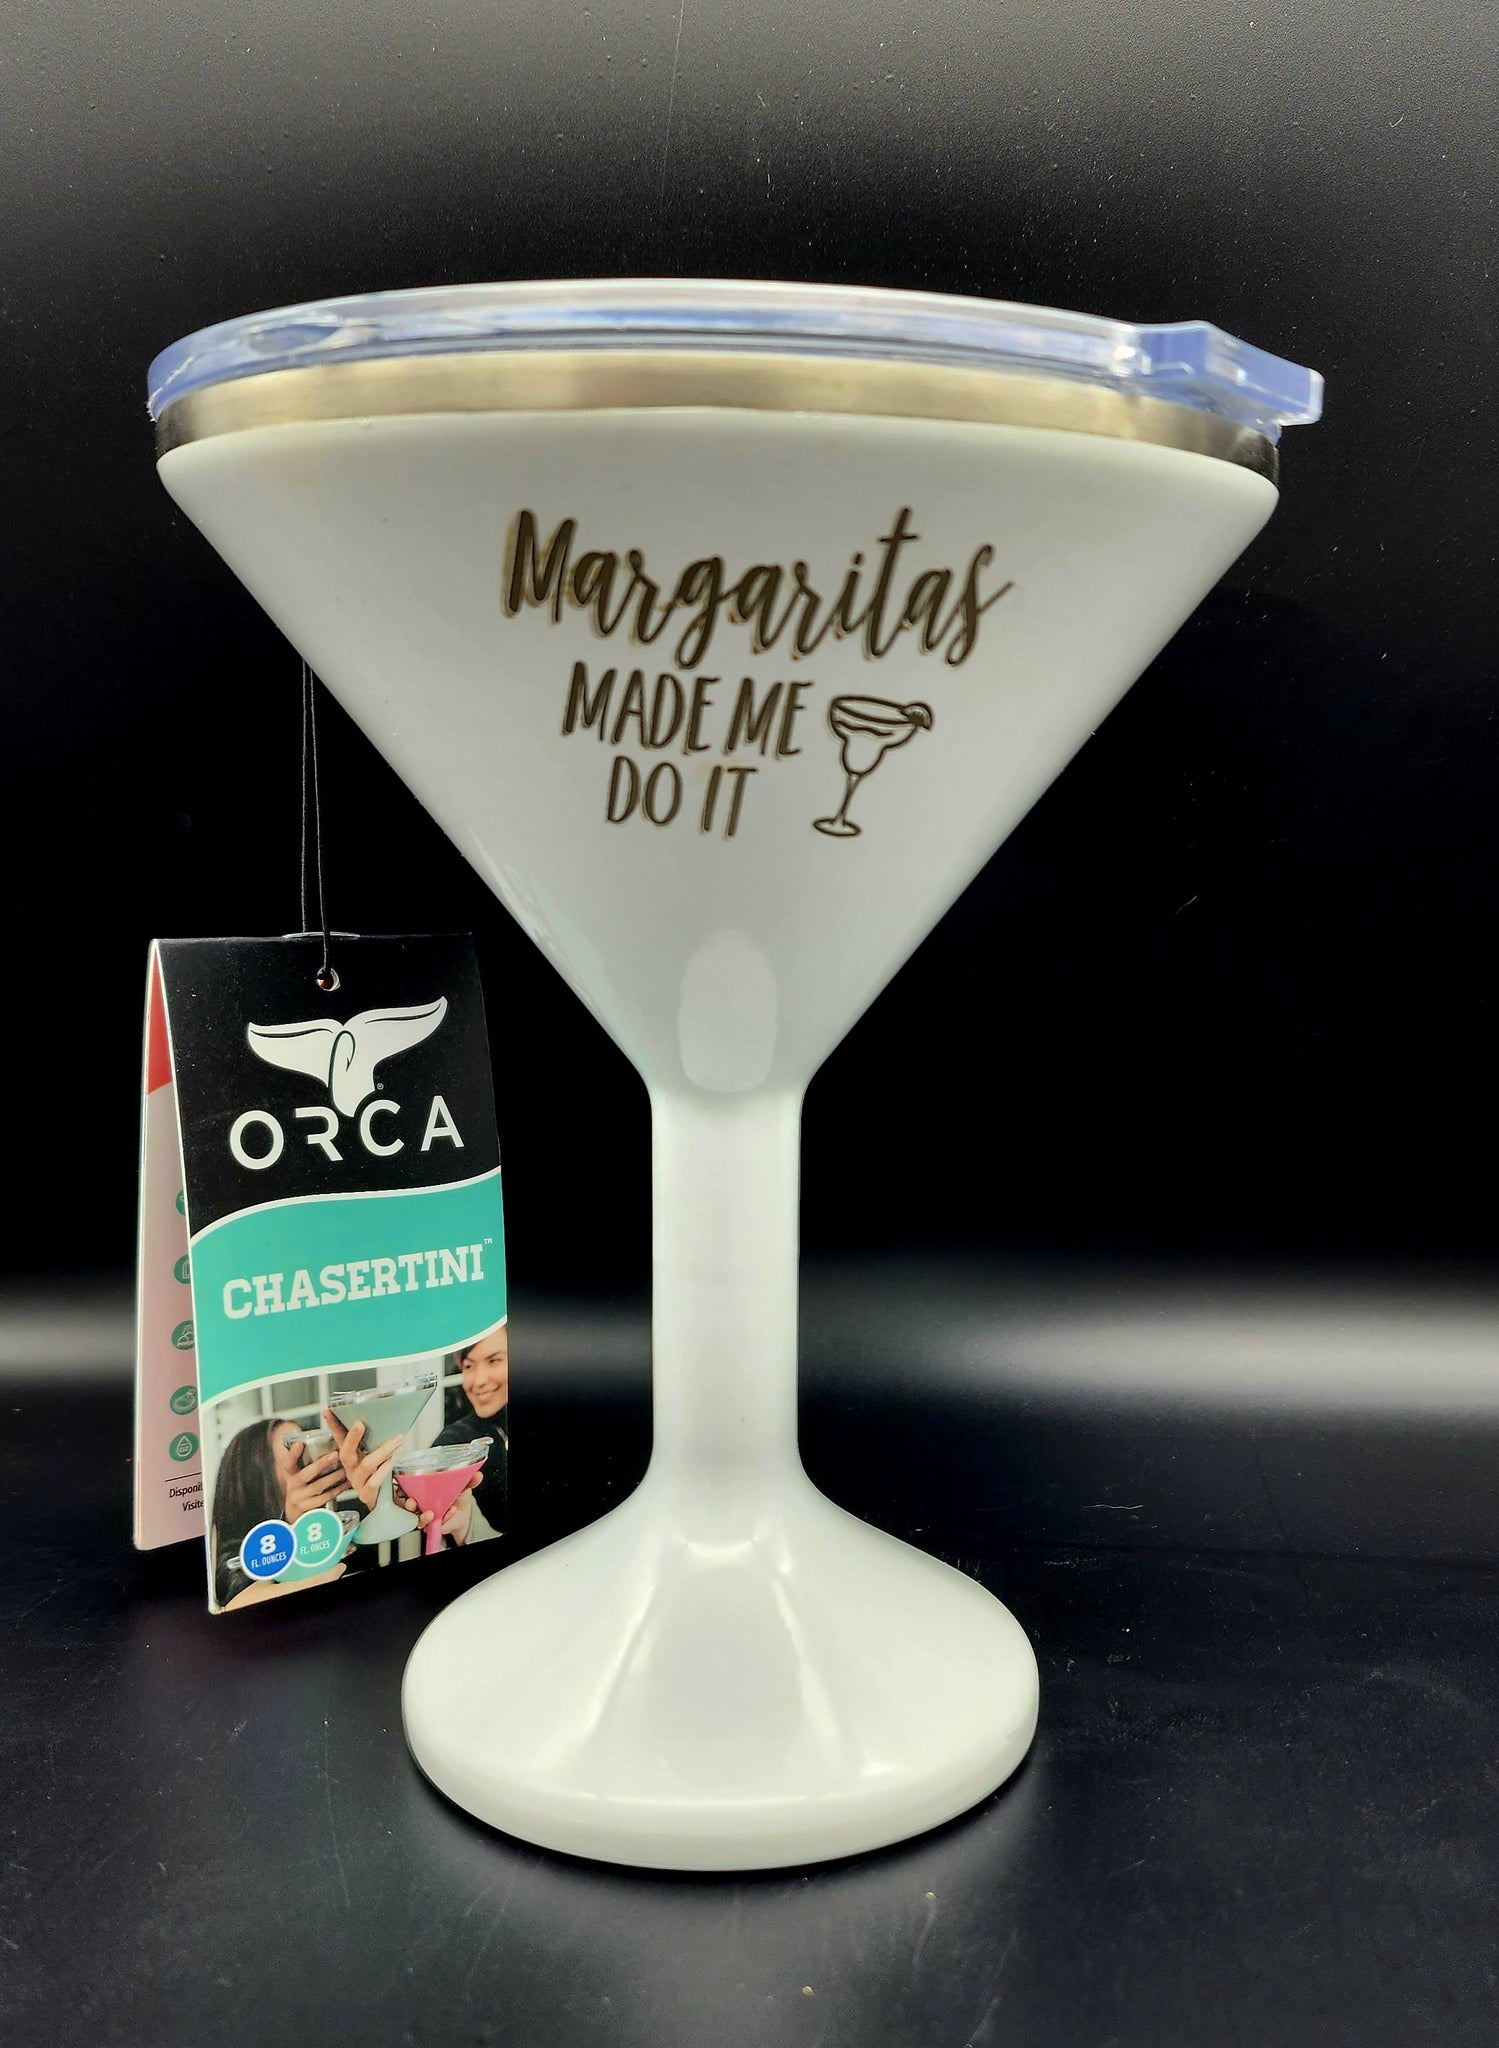 Orca Chasertini-Margaritas Made Me Do It